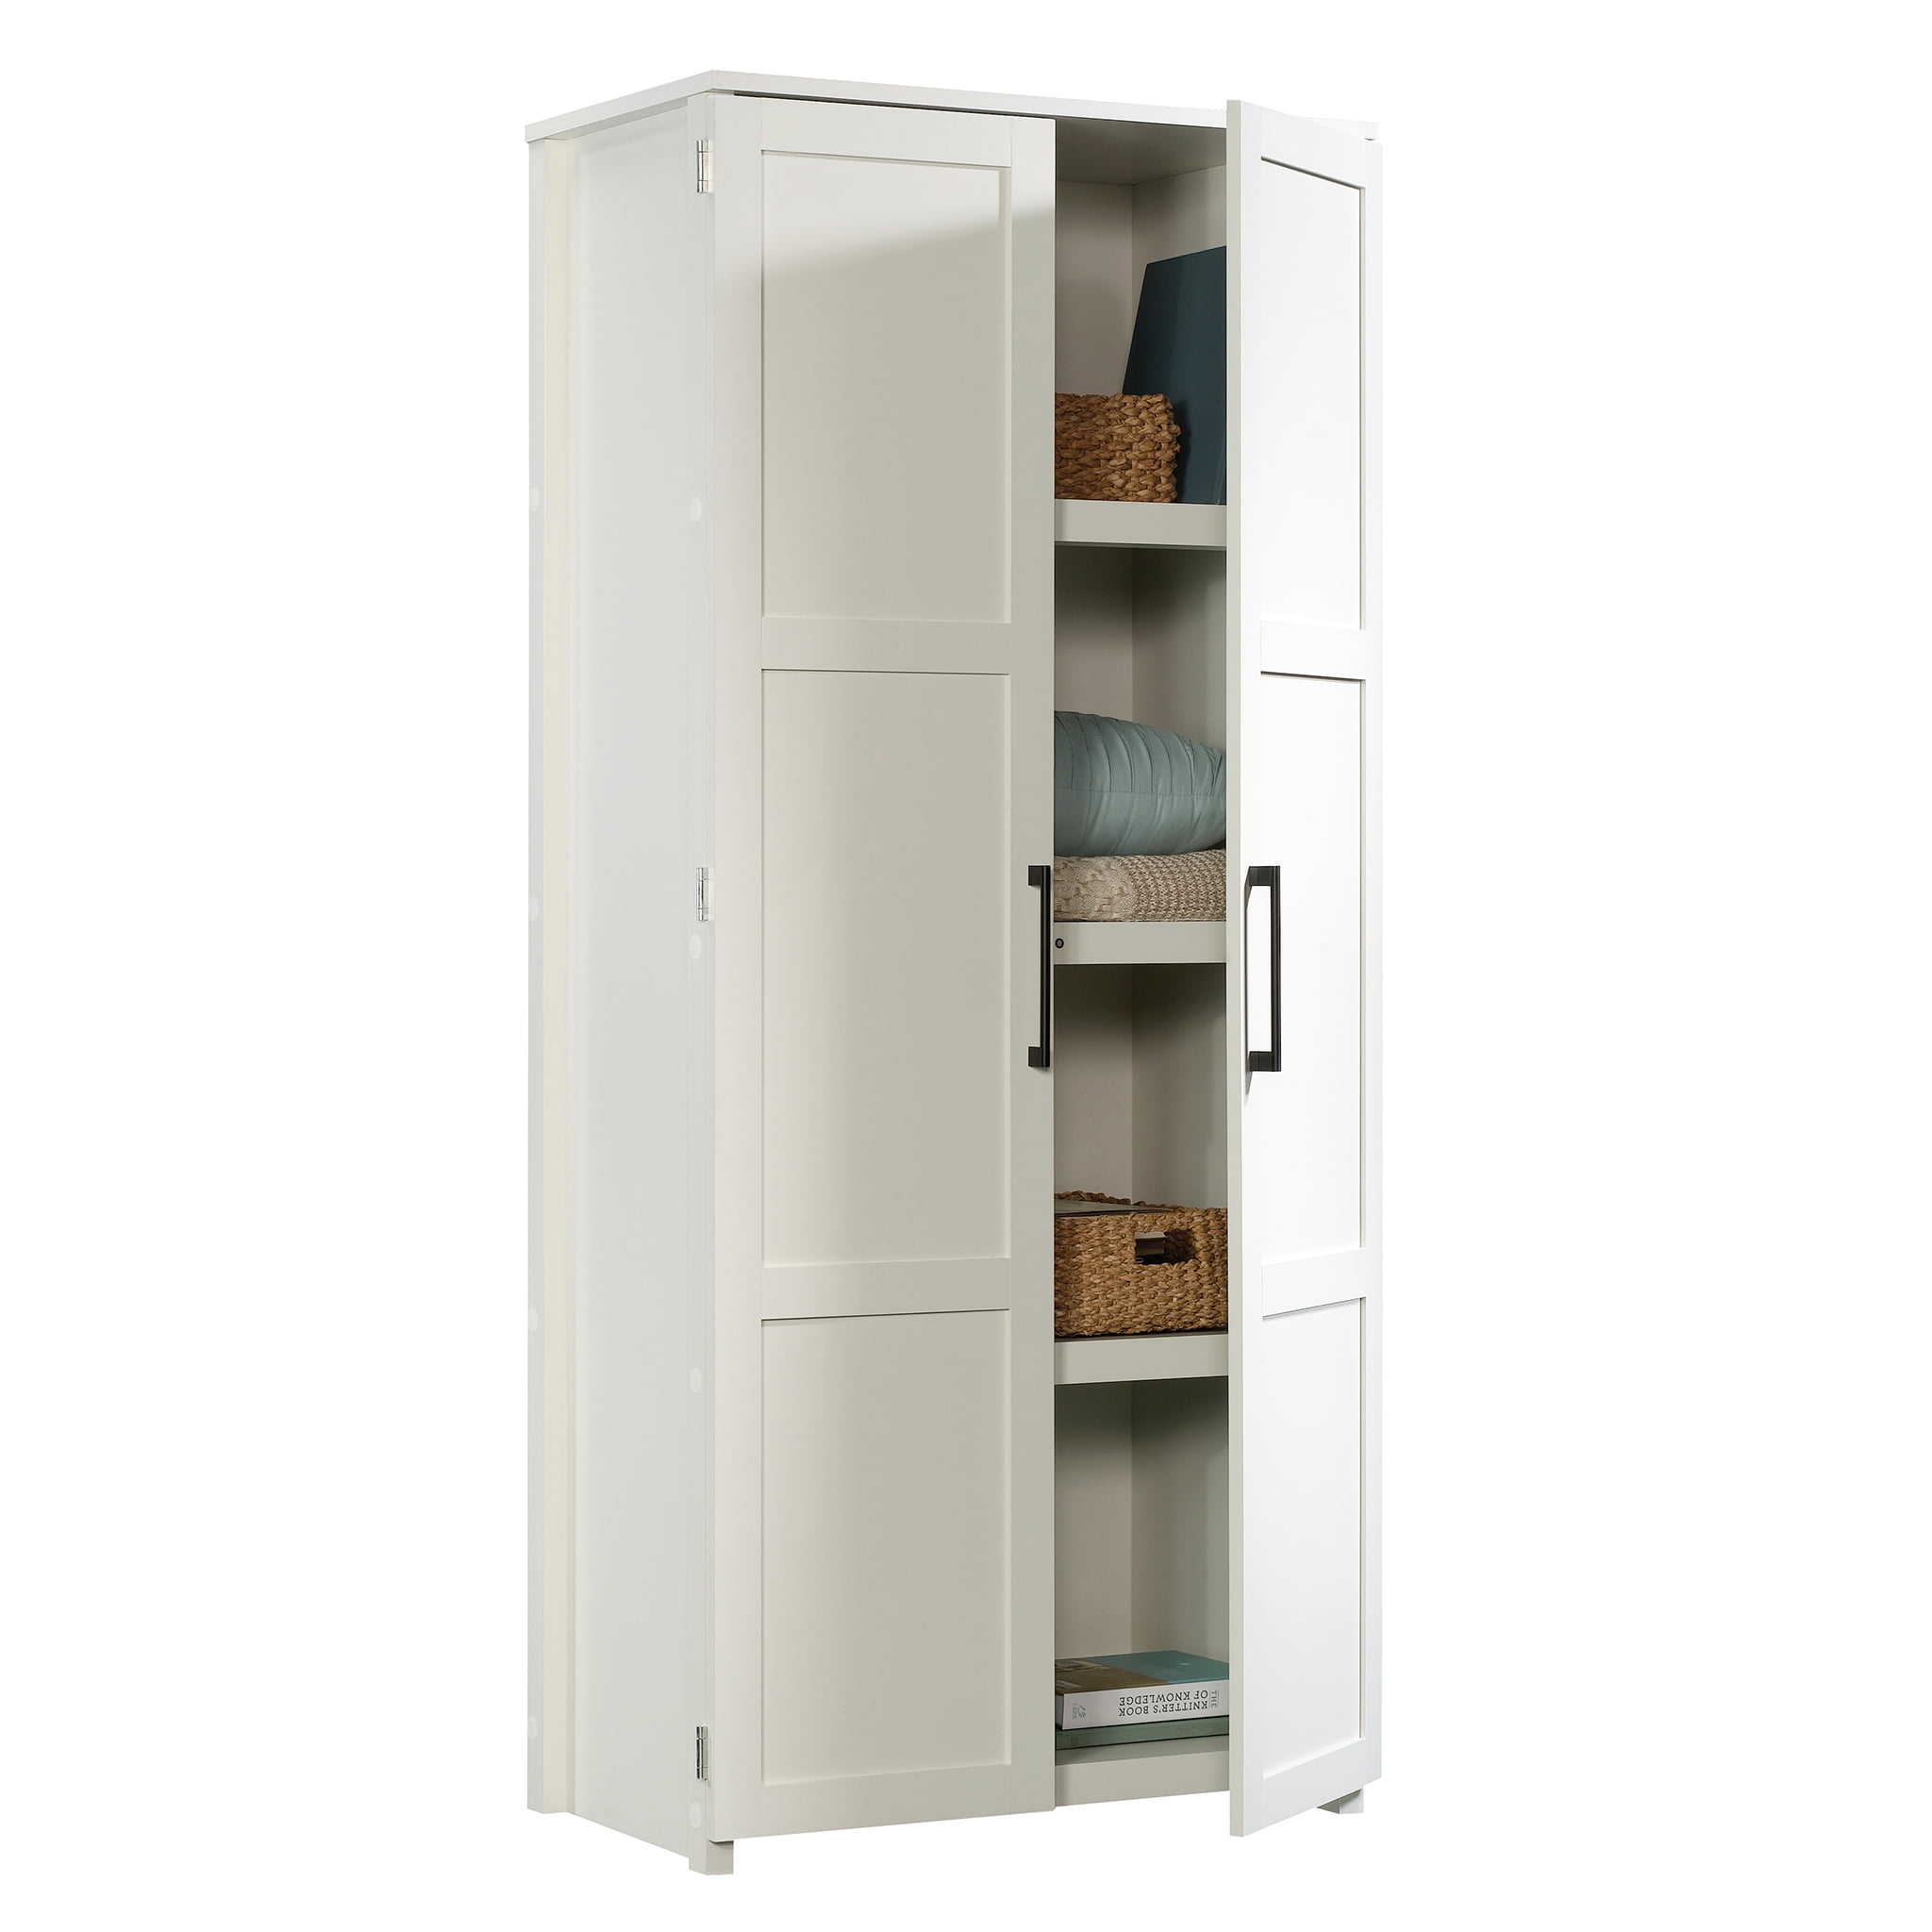 44 x 15 x 58 DIY Stackable Storage Cabinet - Woodwhite